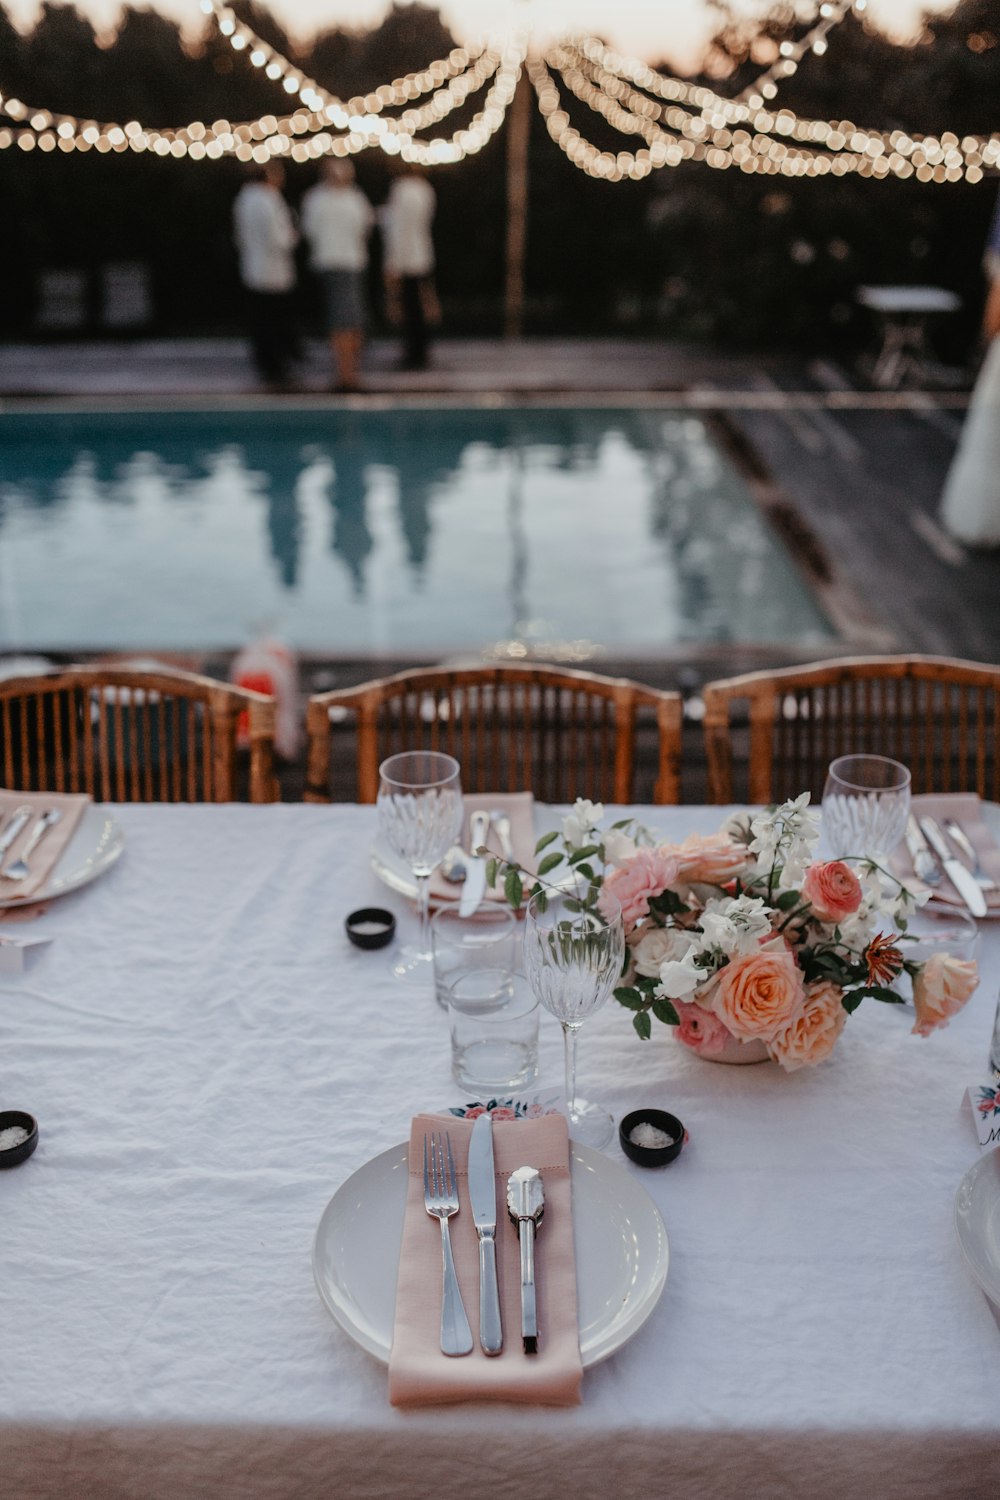 a table set for a wedding with a pool in the background